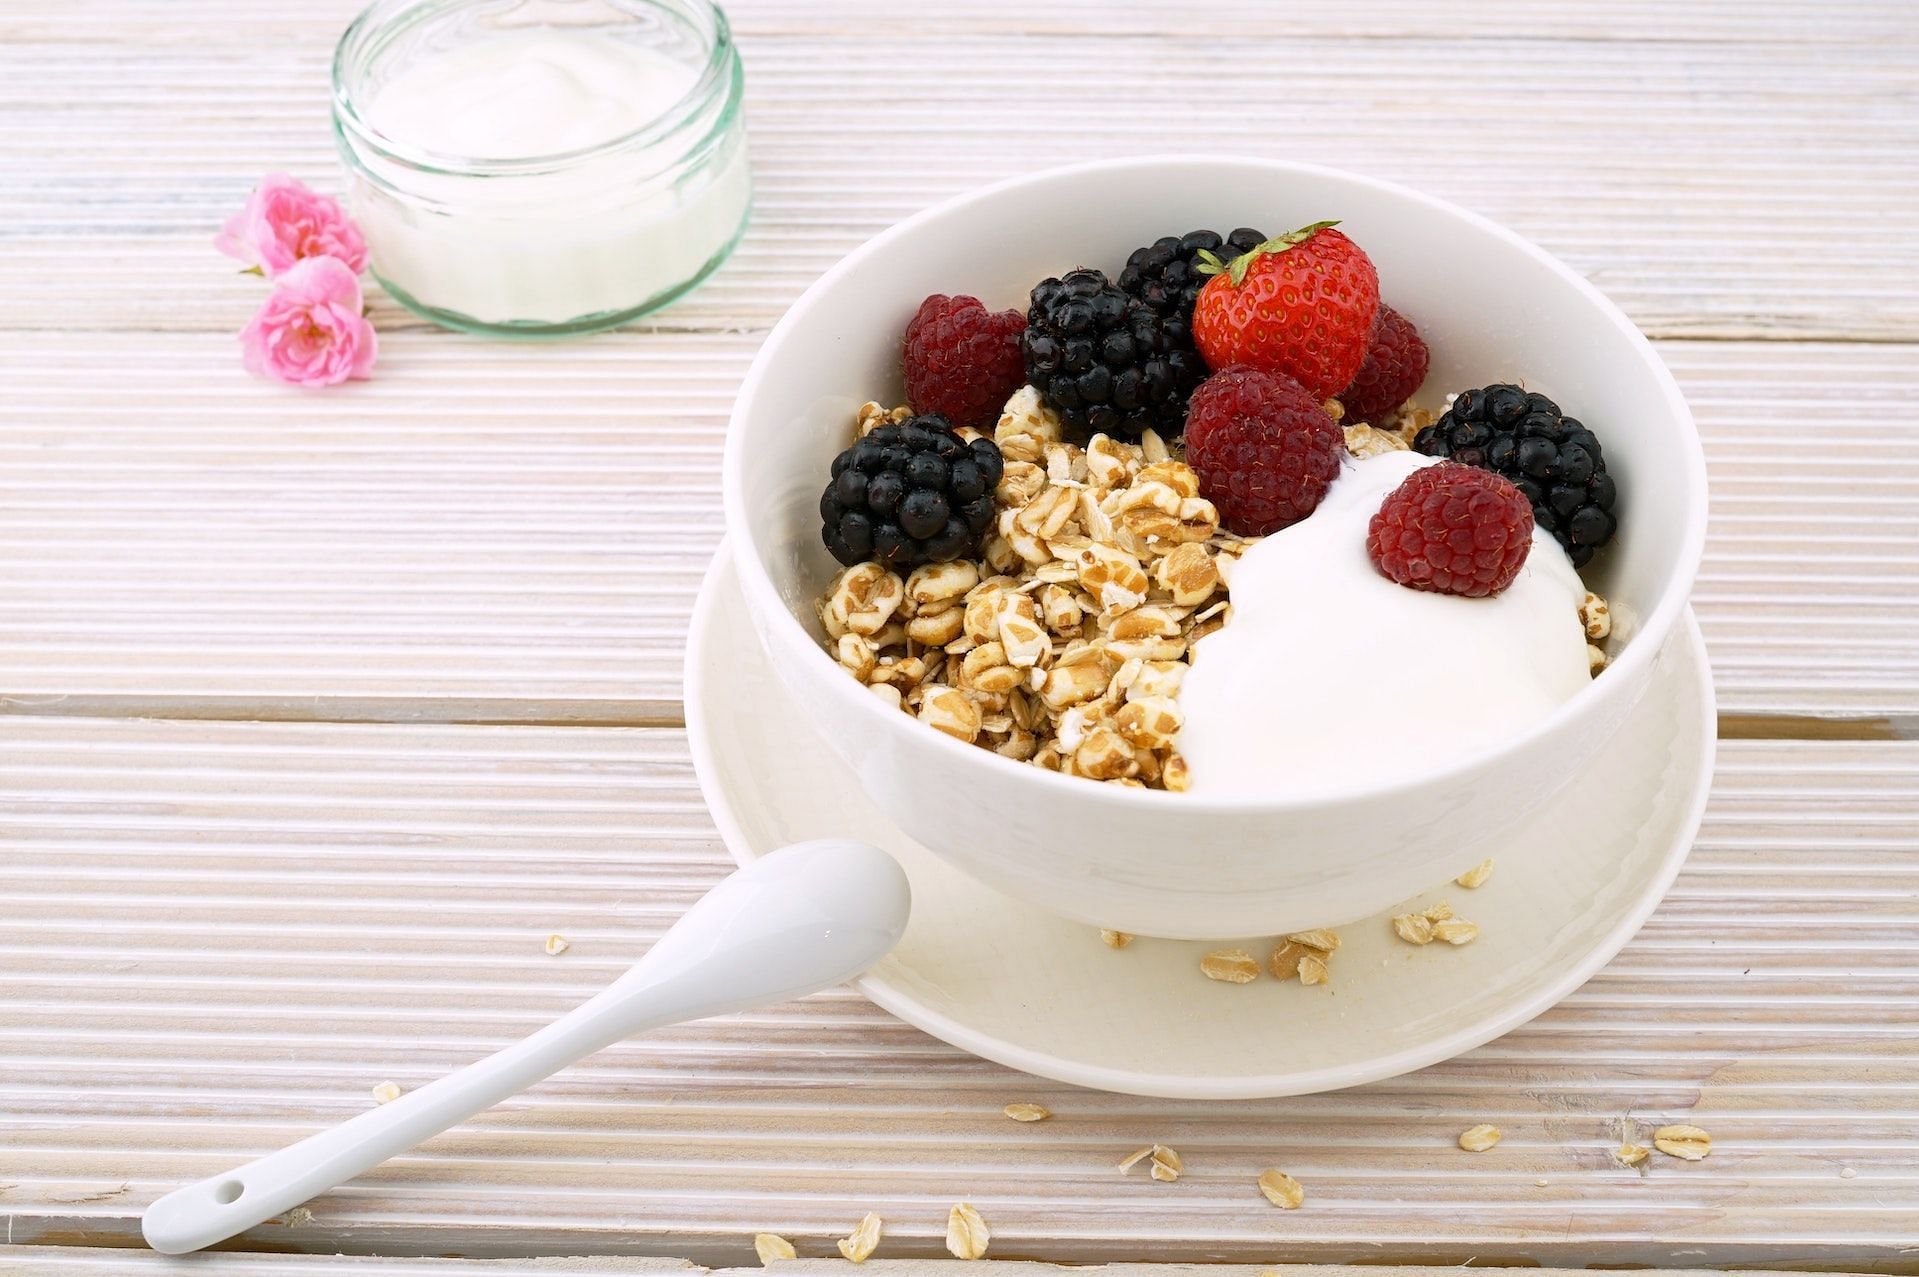 Kefir can be added to oats and cereals. (Photo via Pexels/Life Of Pix)